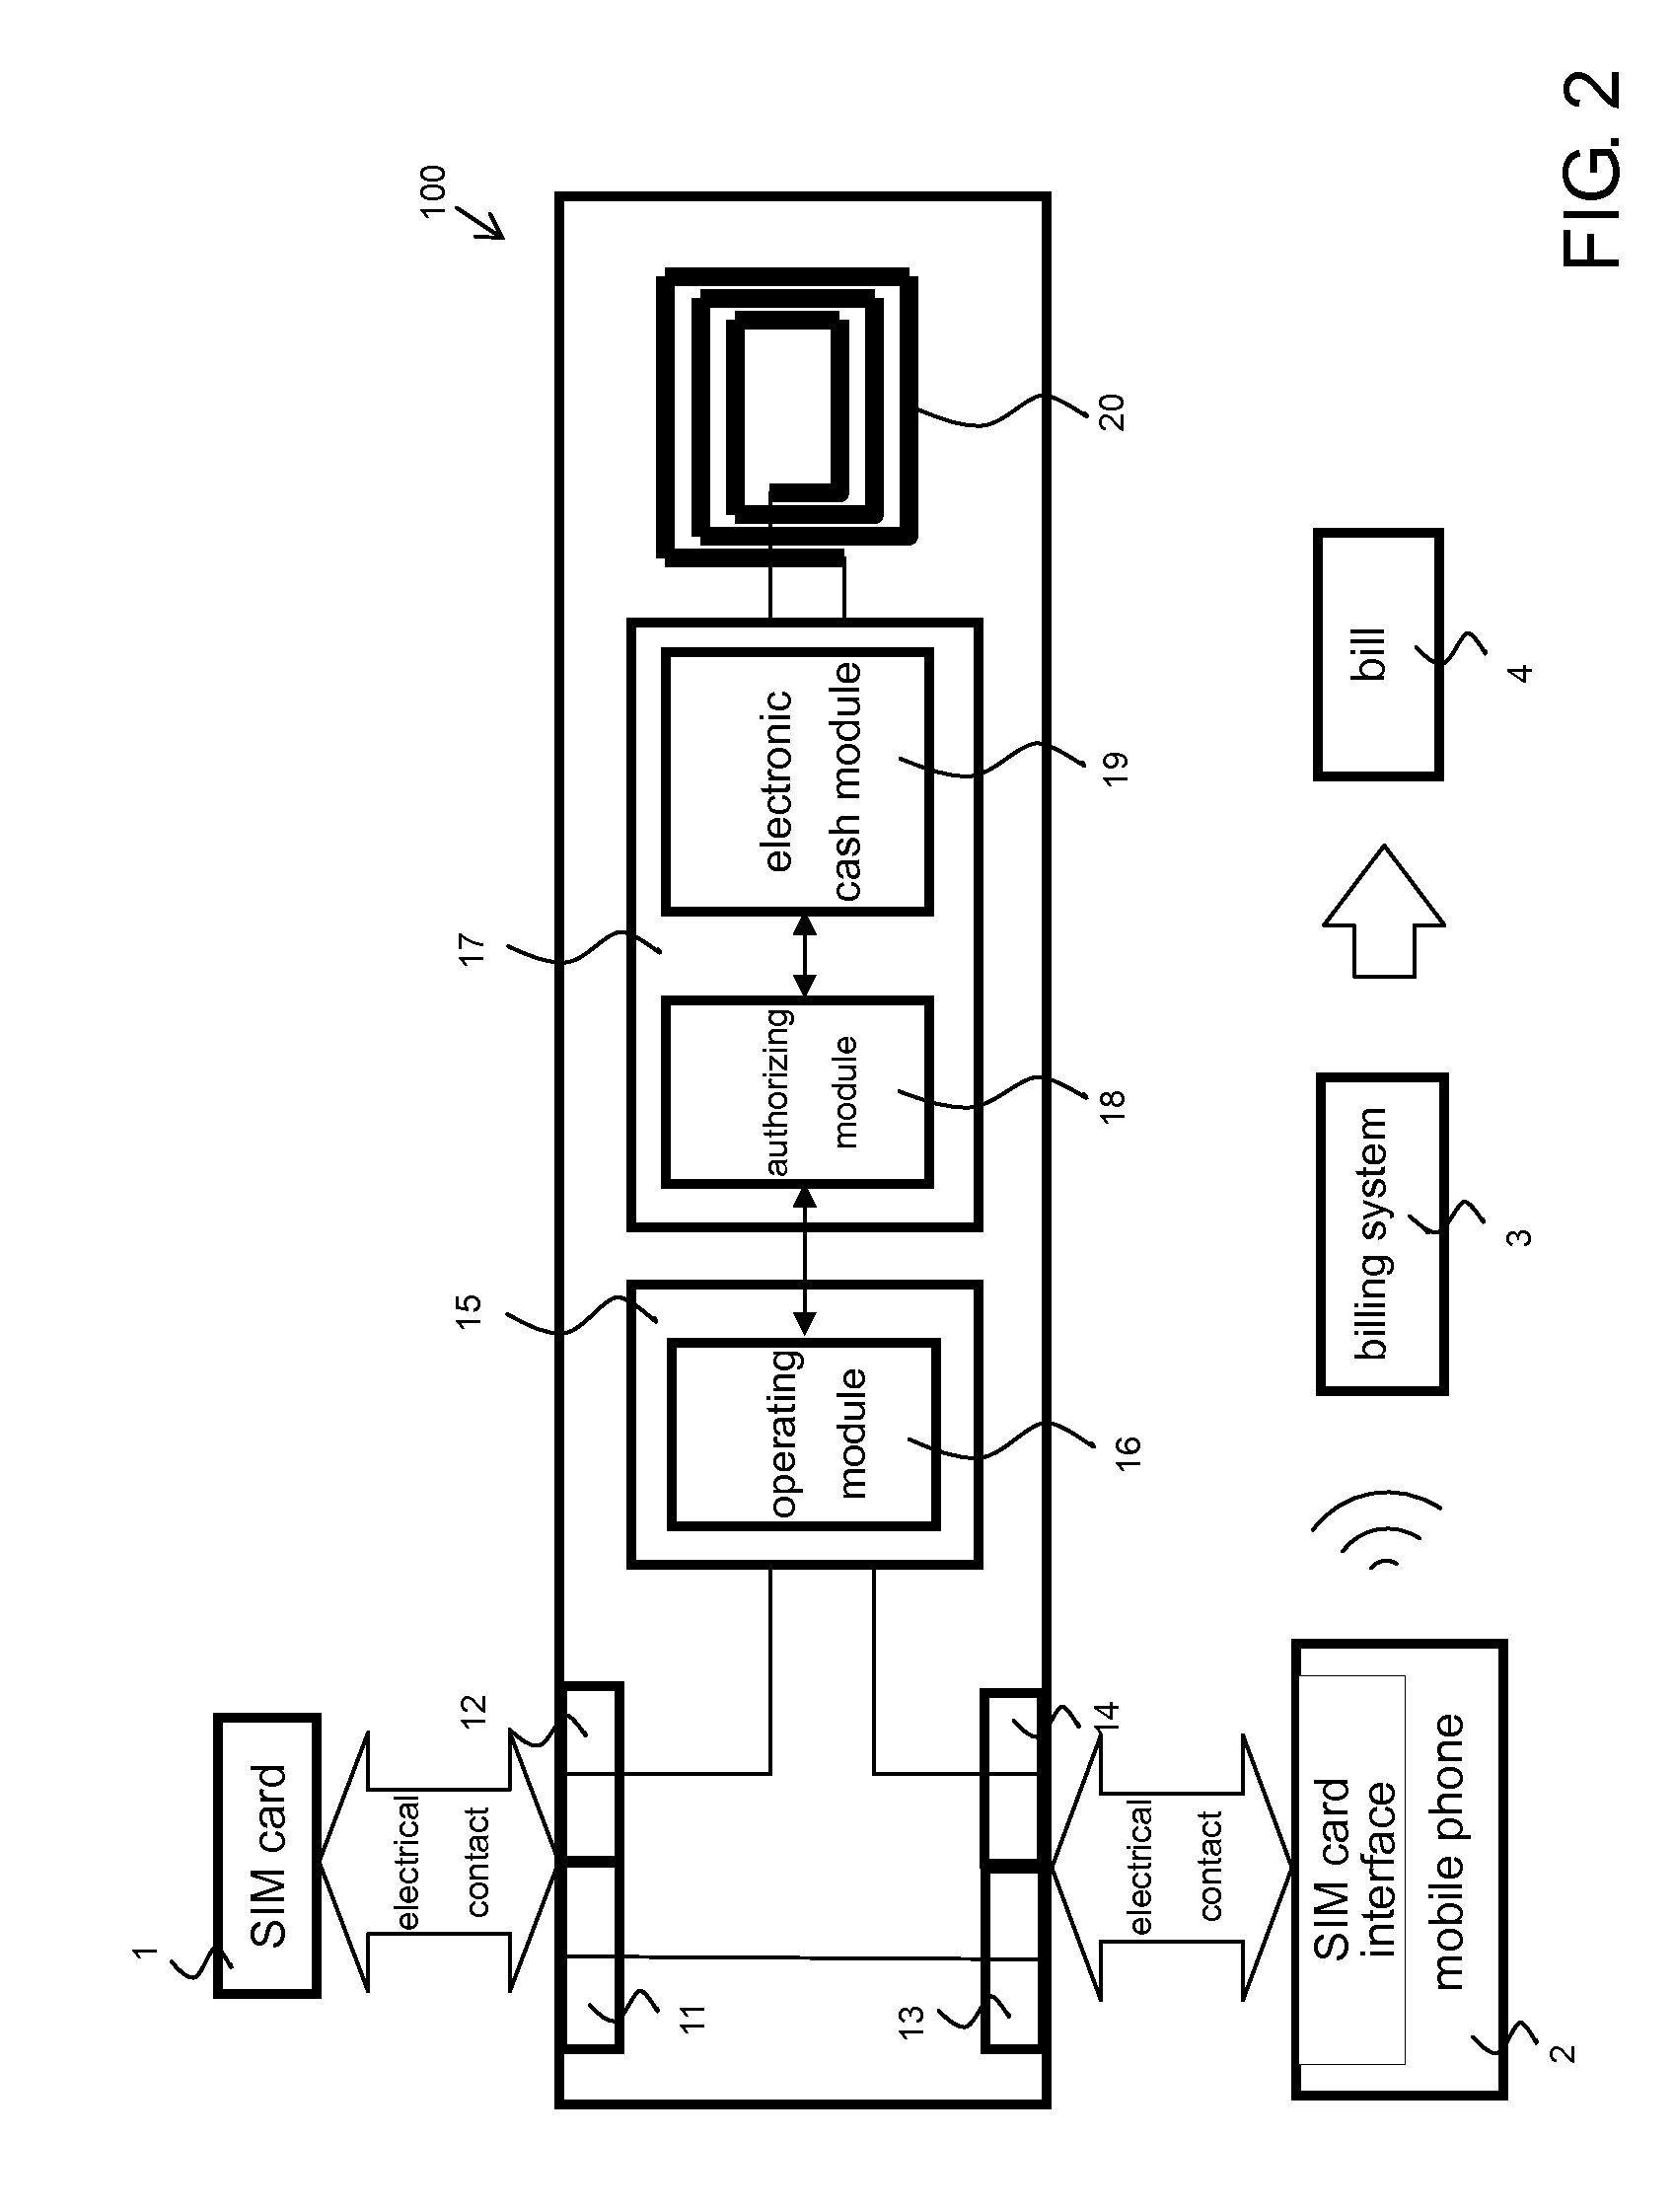 Electronic wallet device